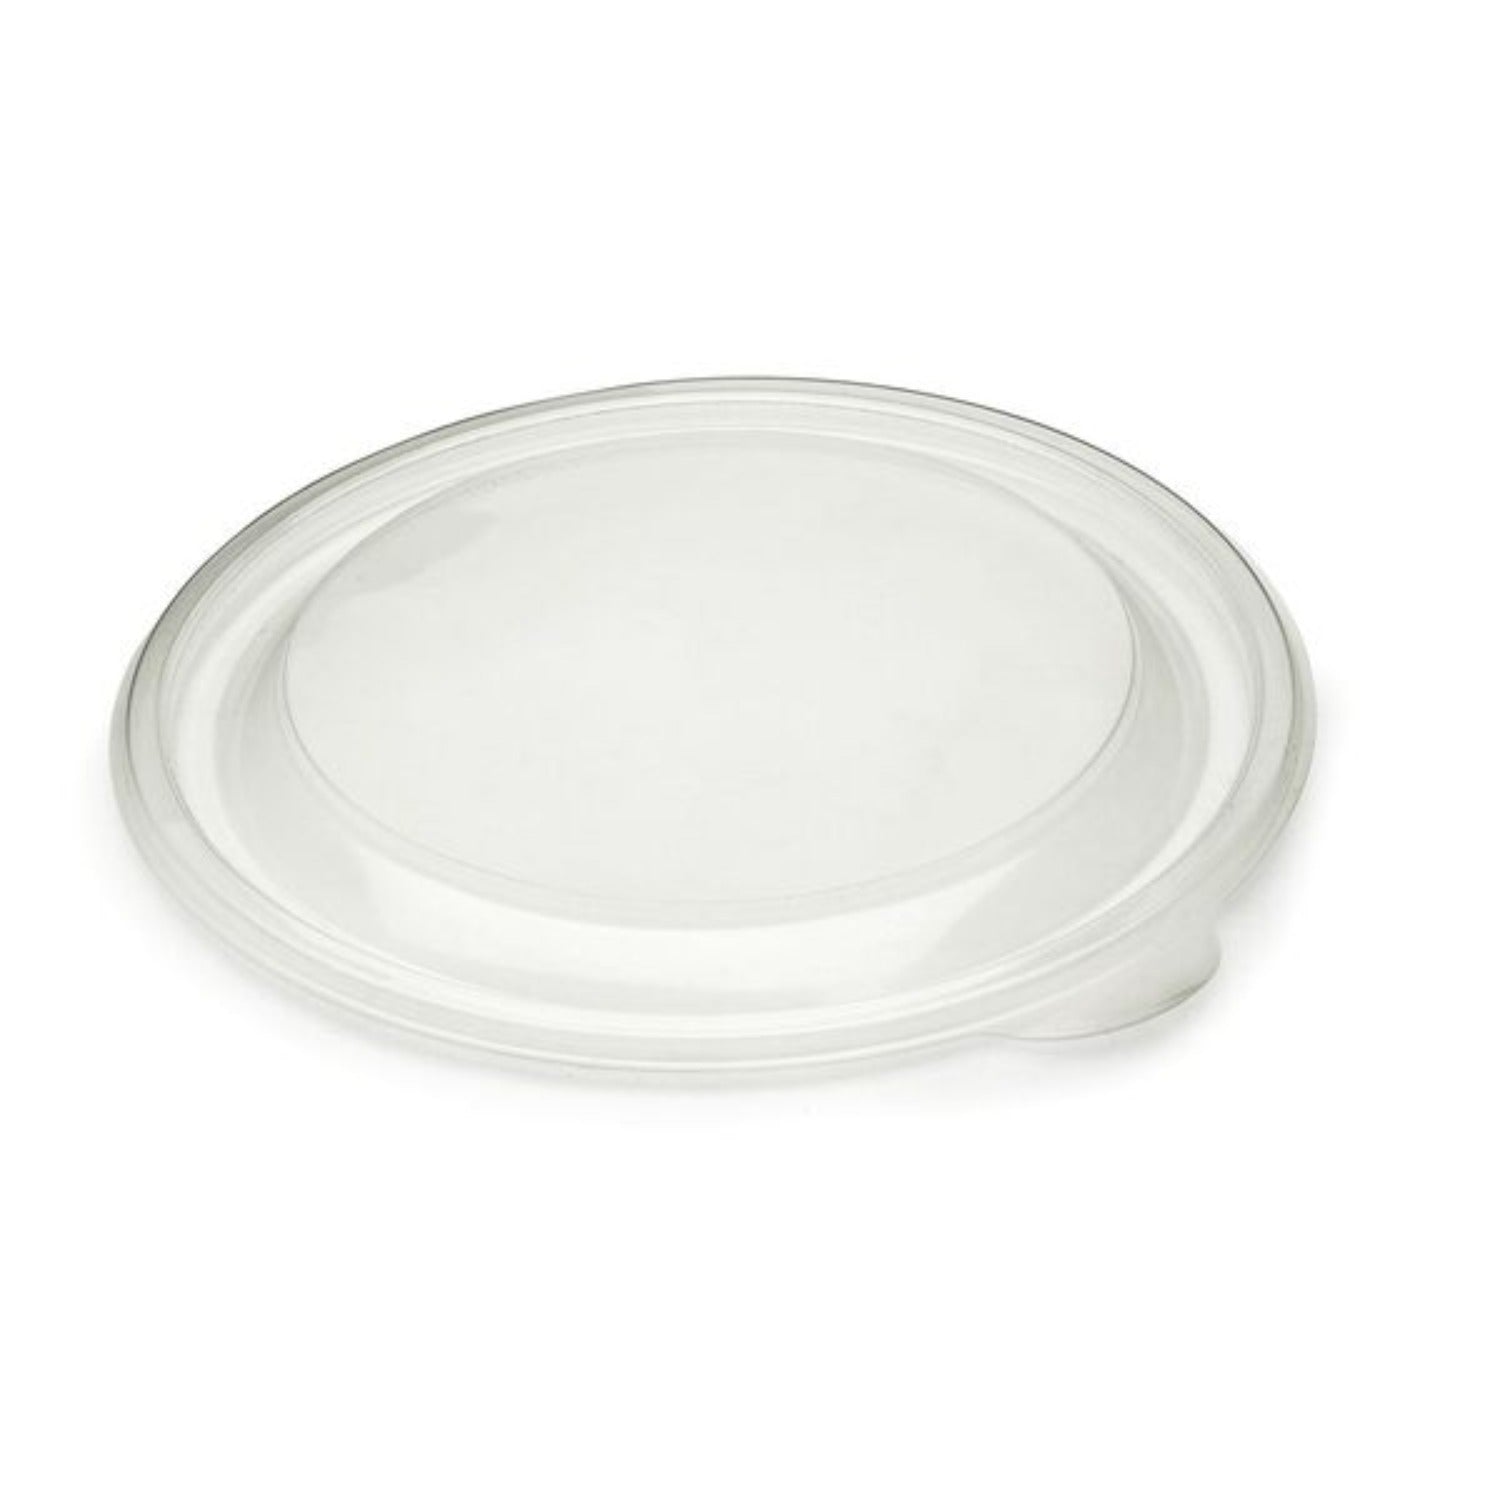 fastpac-lid-to-fit-round-back-container